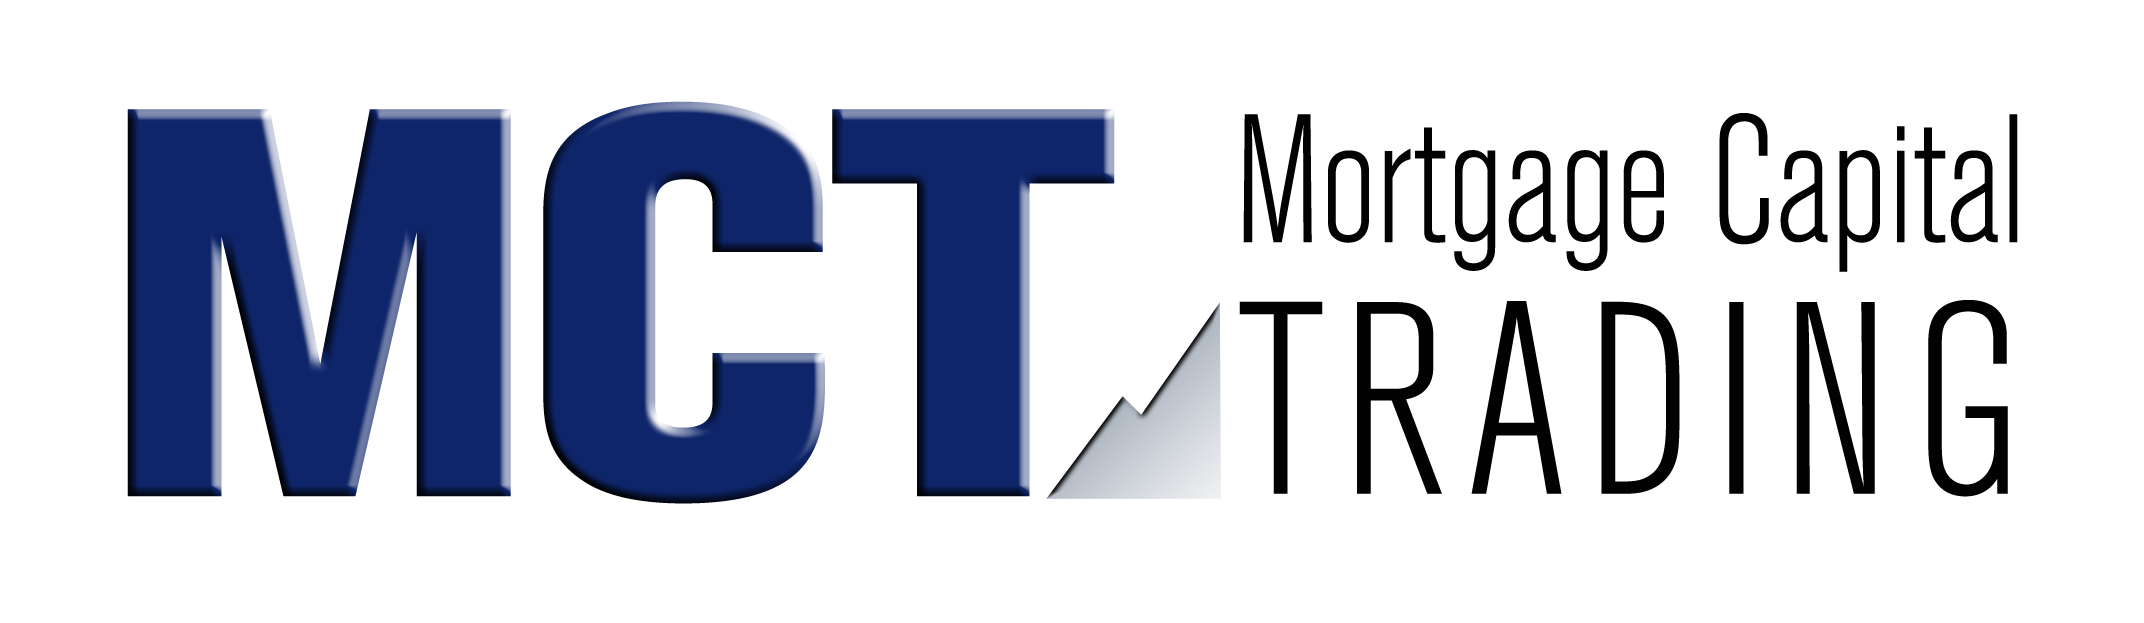 Mortgage Capital Trading Inc. (MCT) has announced that Inc. 5000 has named MCT to its 38th annual list of winners for the eight consecutive year